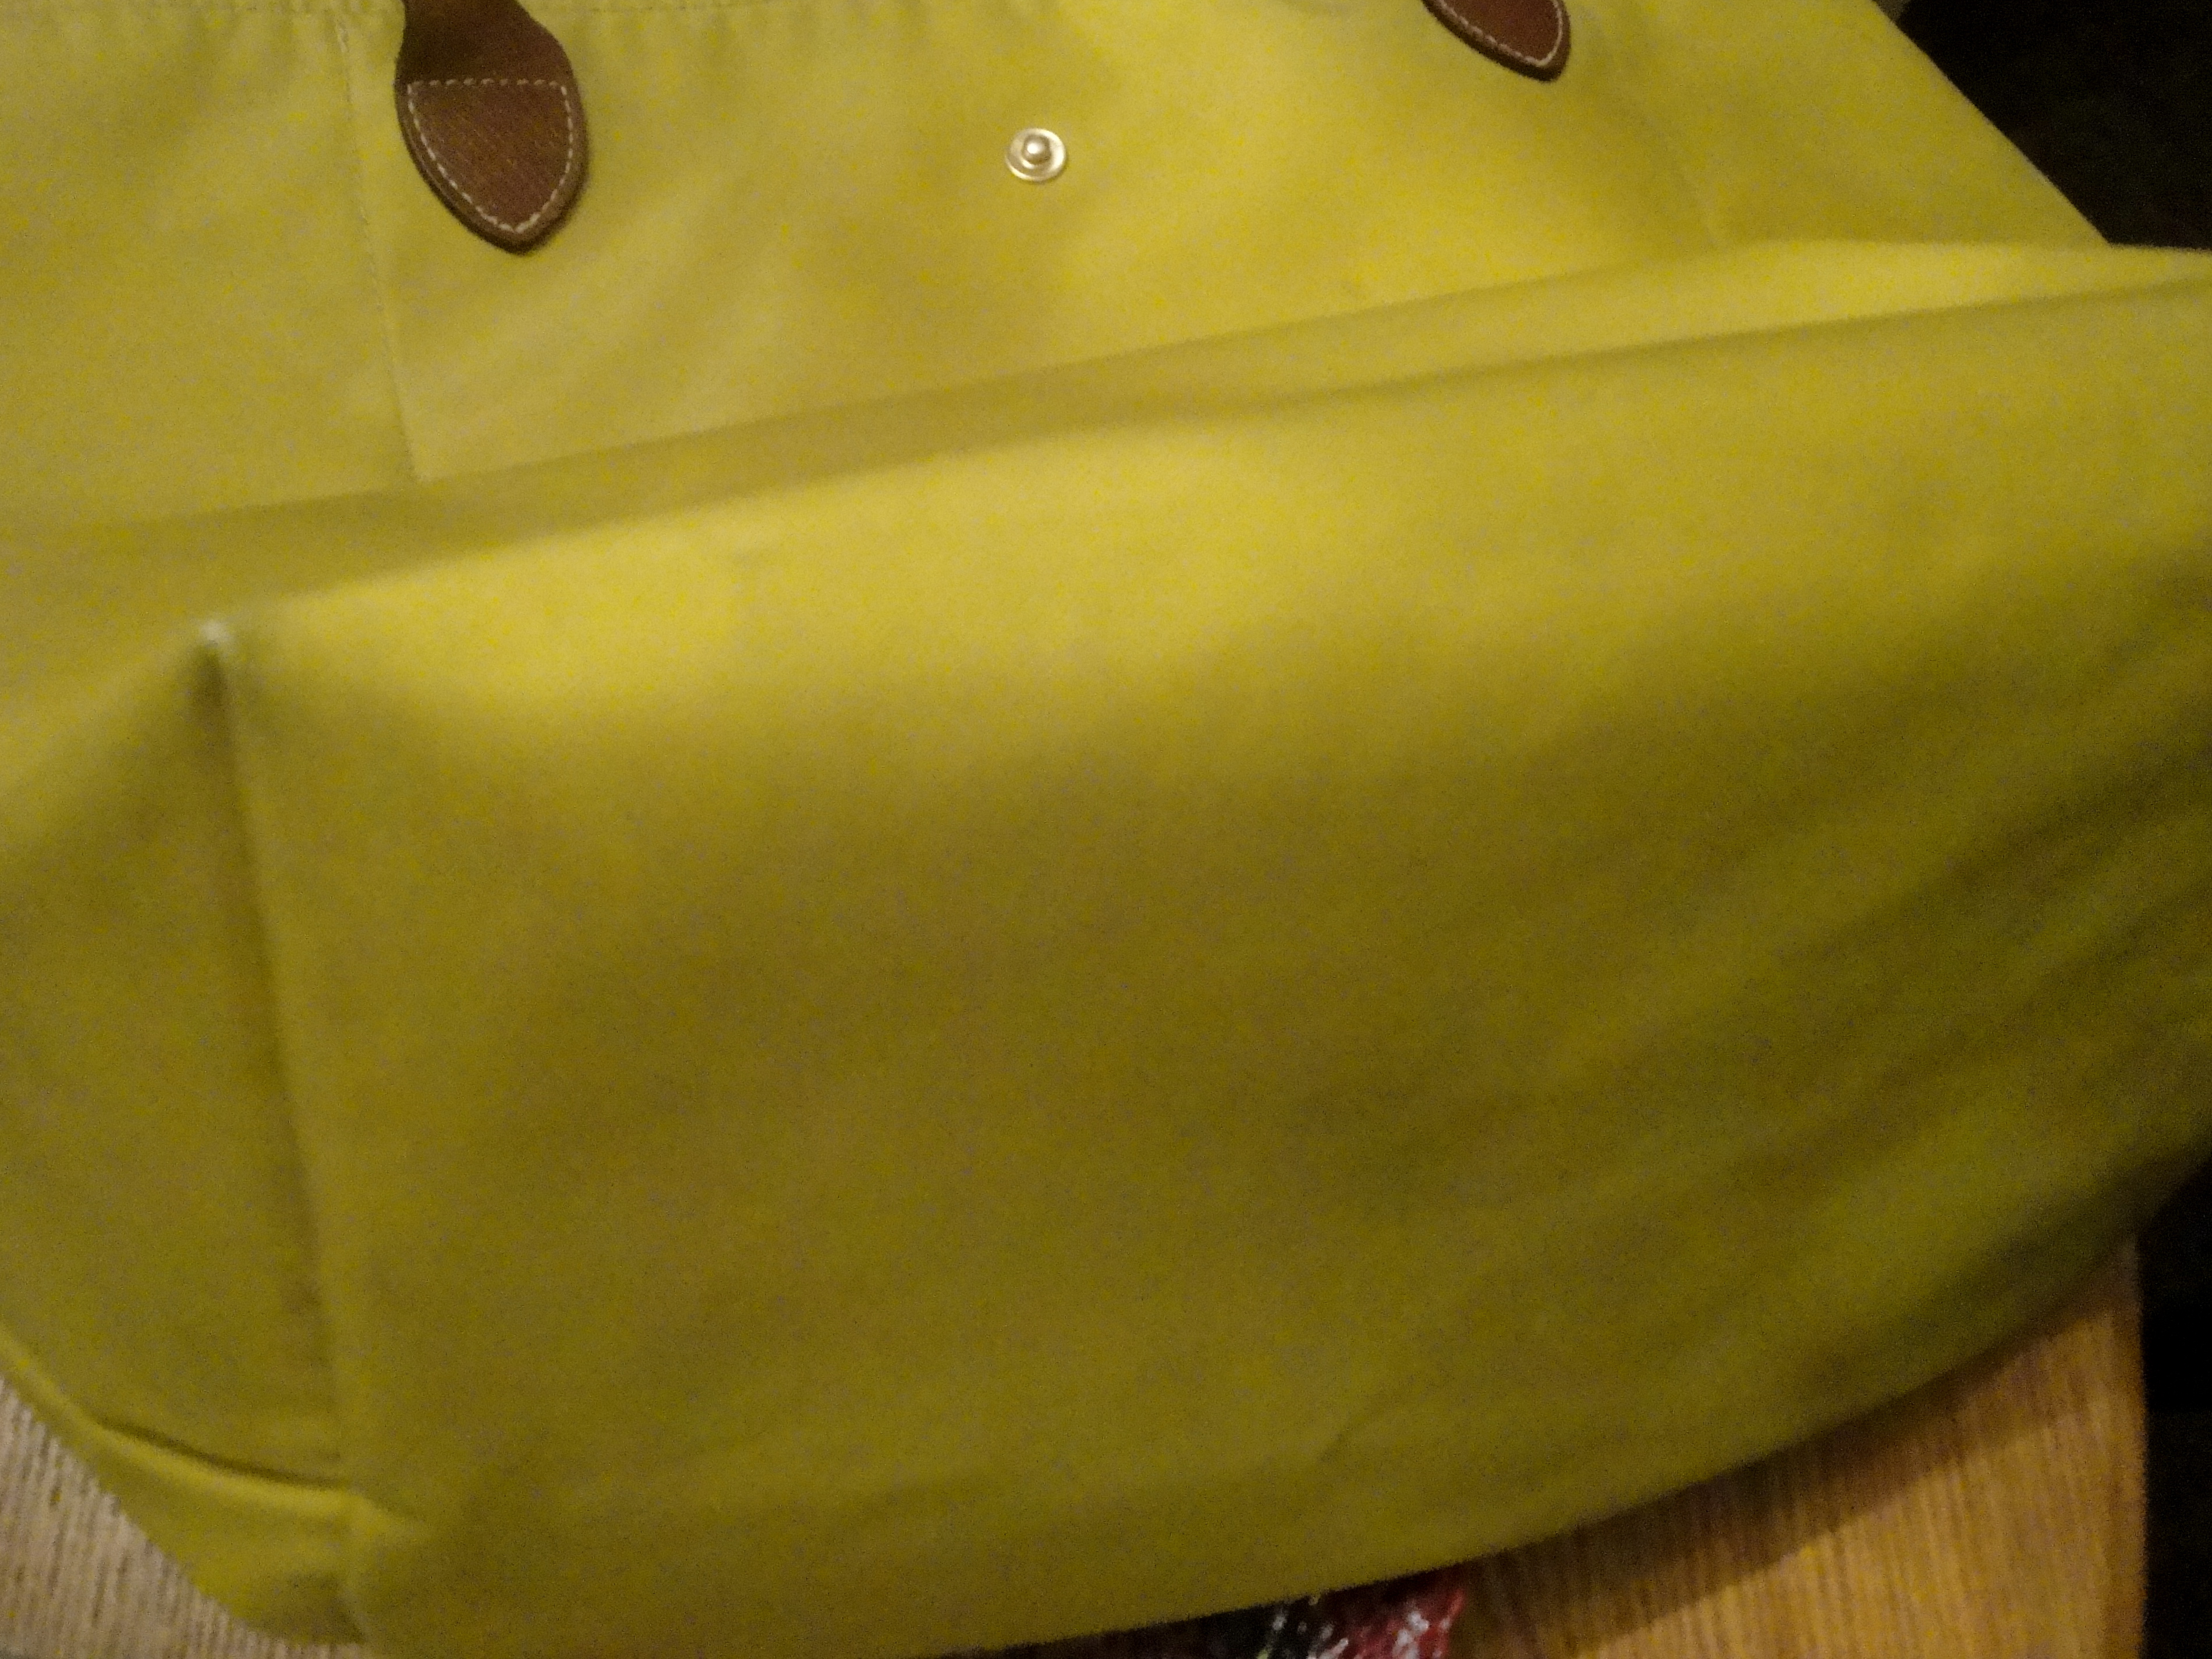 how to clean longchamp bag